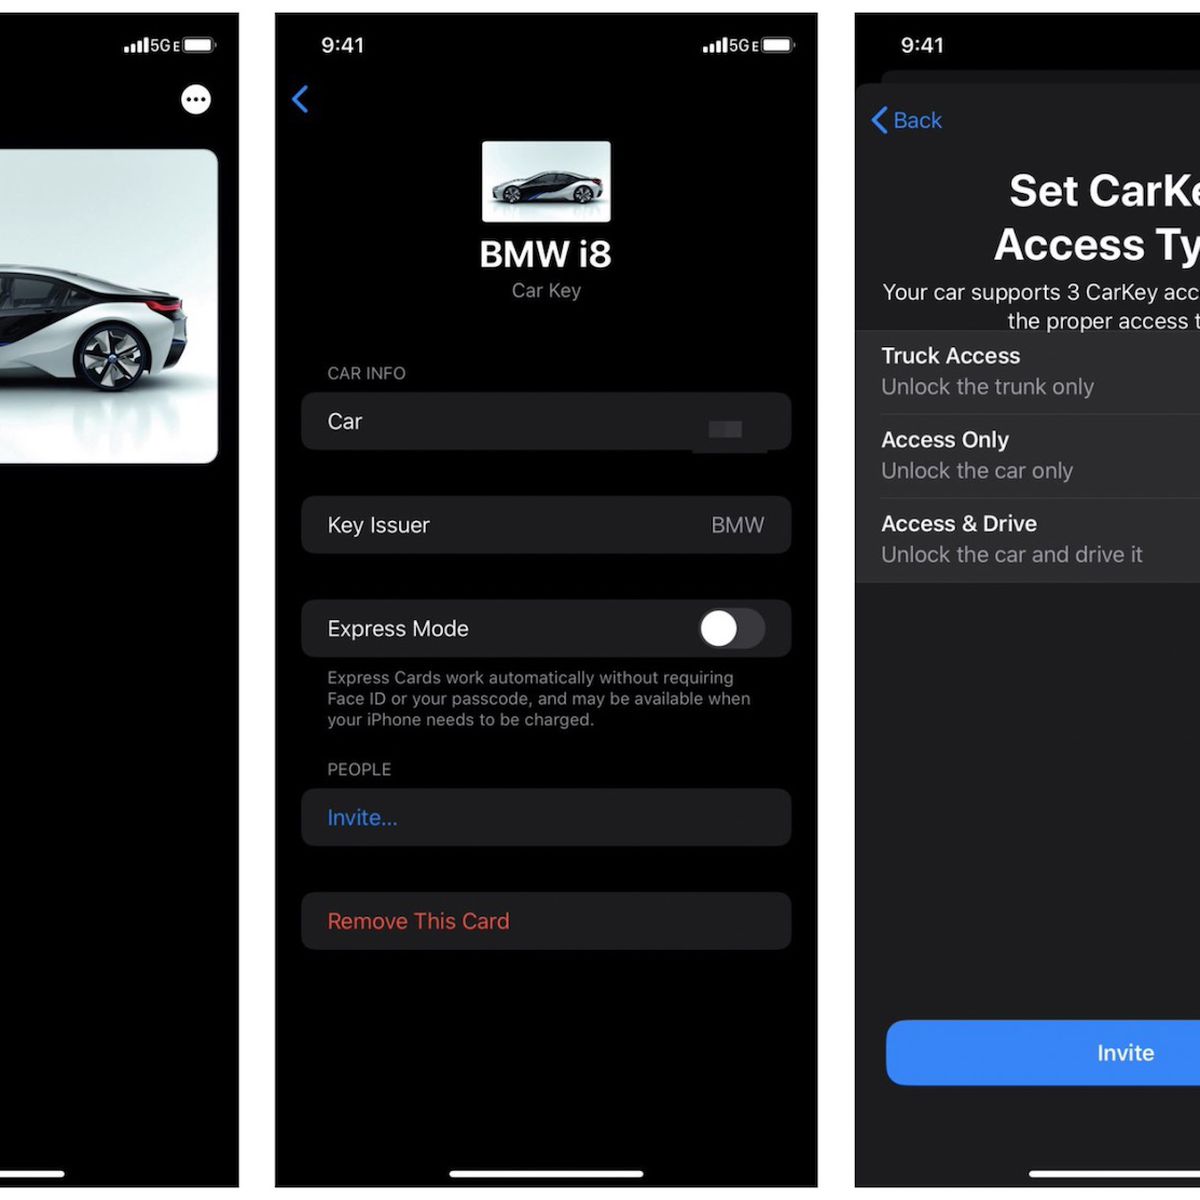 Carkey Screenshots Reveal Digital Keys In Wallet App Bmw Likely To Support Feature At Launch Macrumors